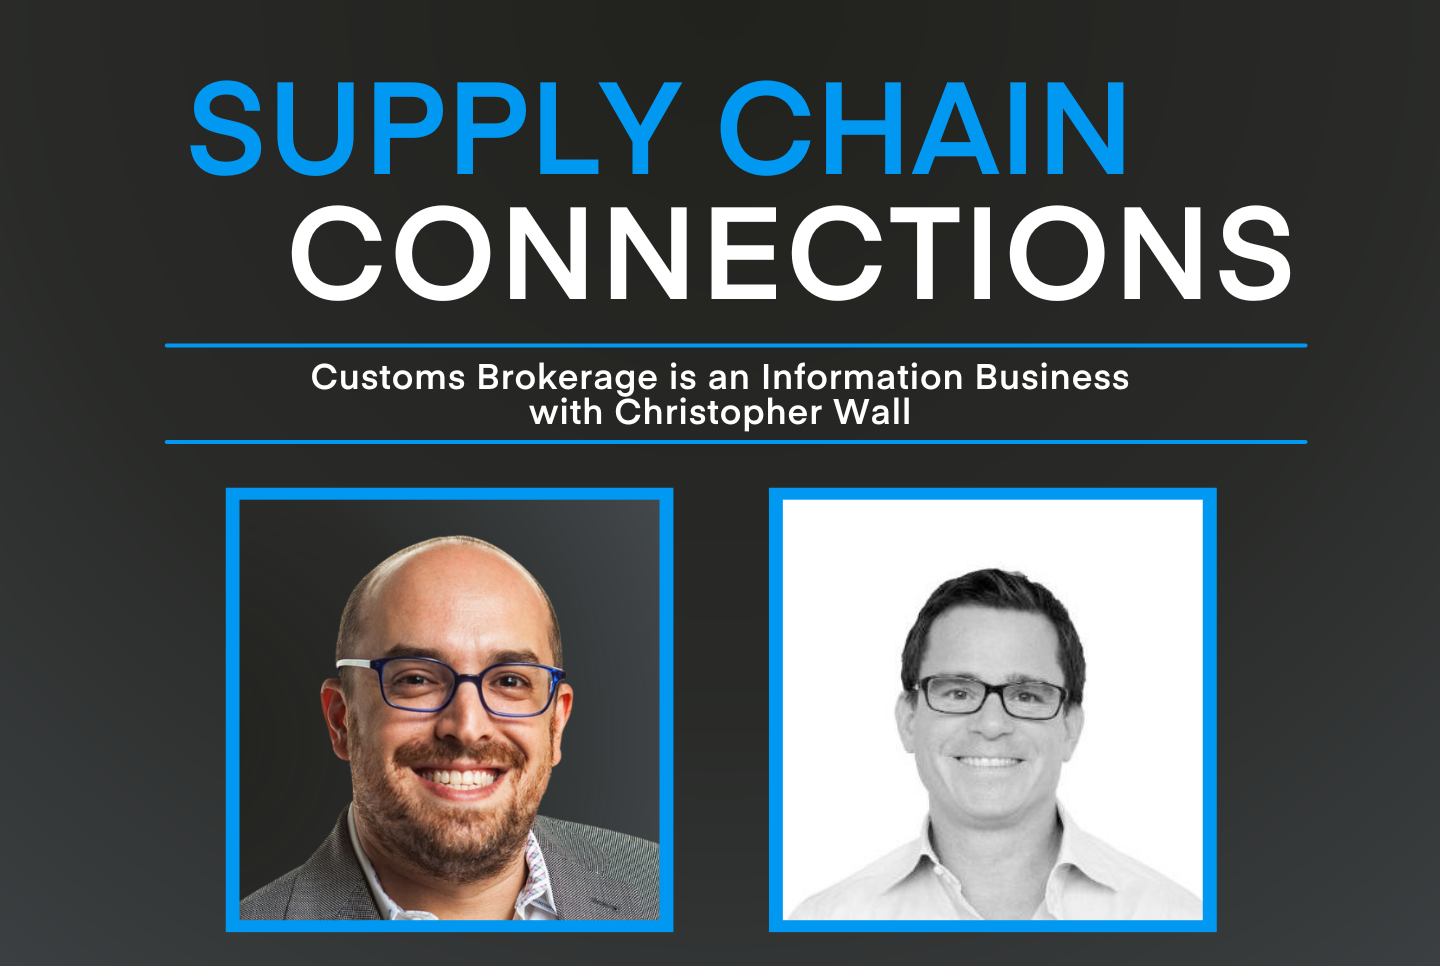 Podcast: Customs Brokerage is an Information Business with Christopher Wall